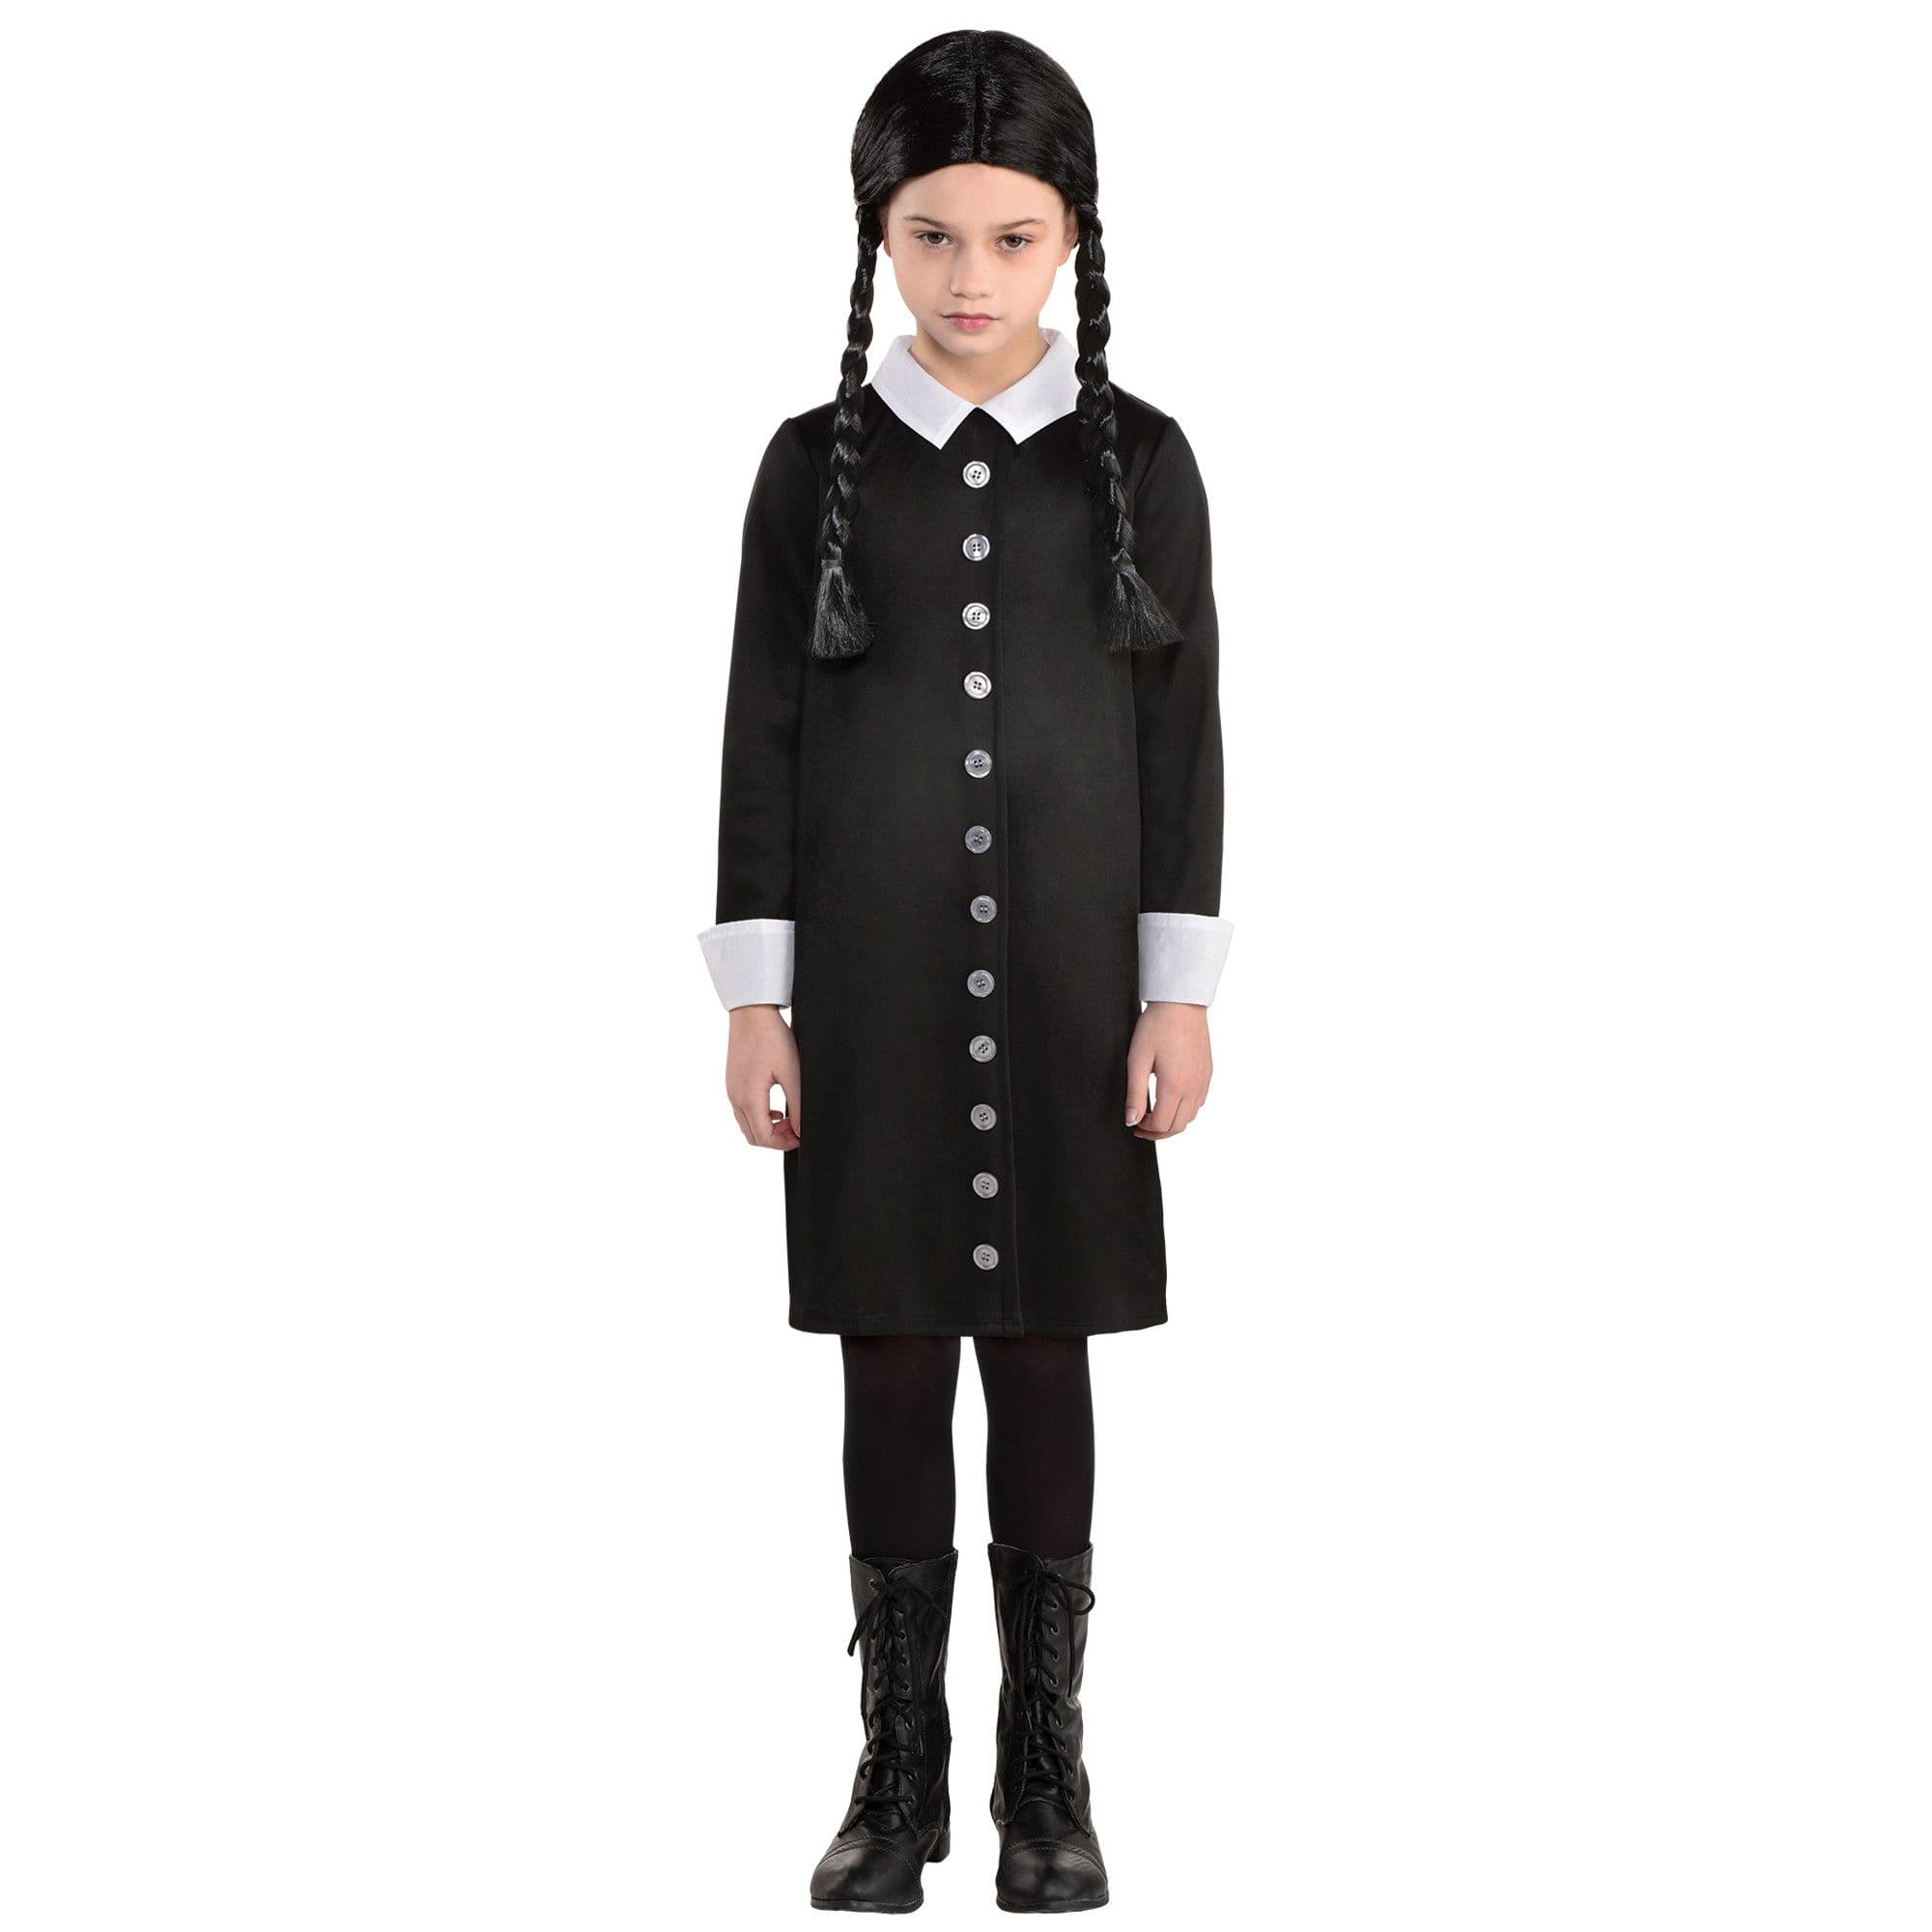 Wednesday The Addams Family Wig for Kids | Party City